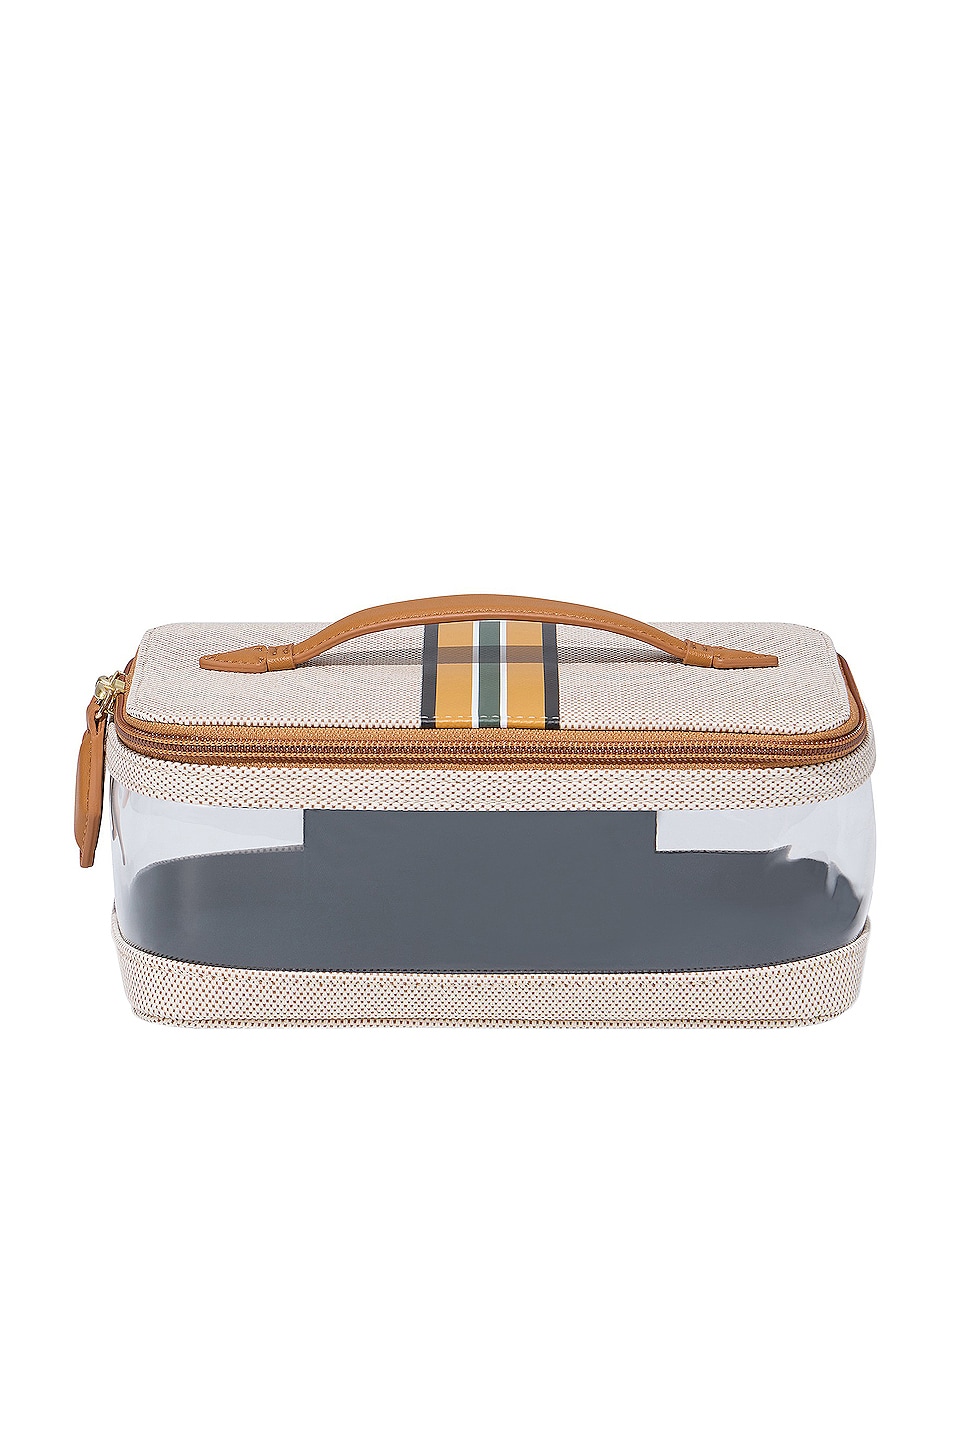 Cabana See-all Vanity Case in Tan